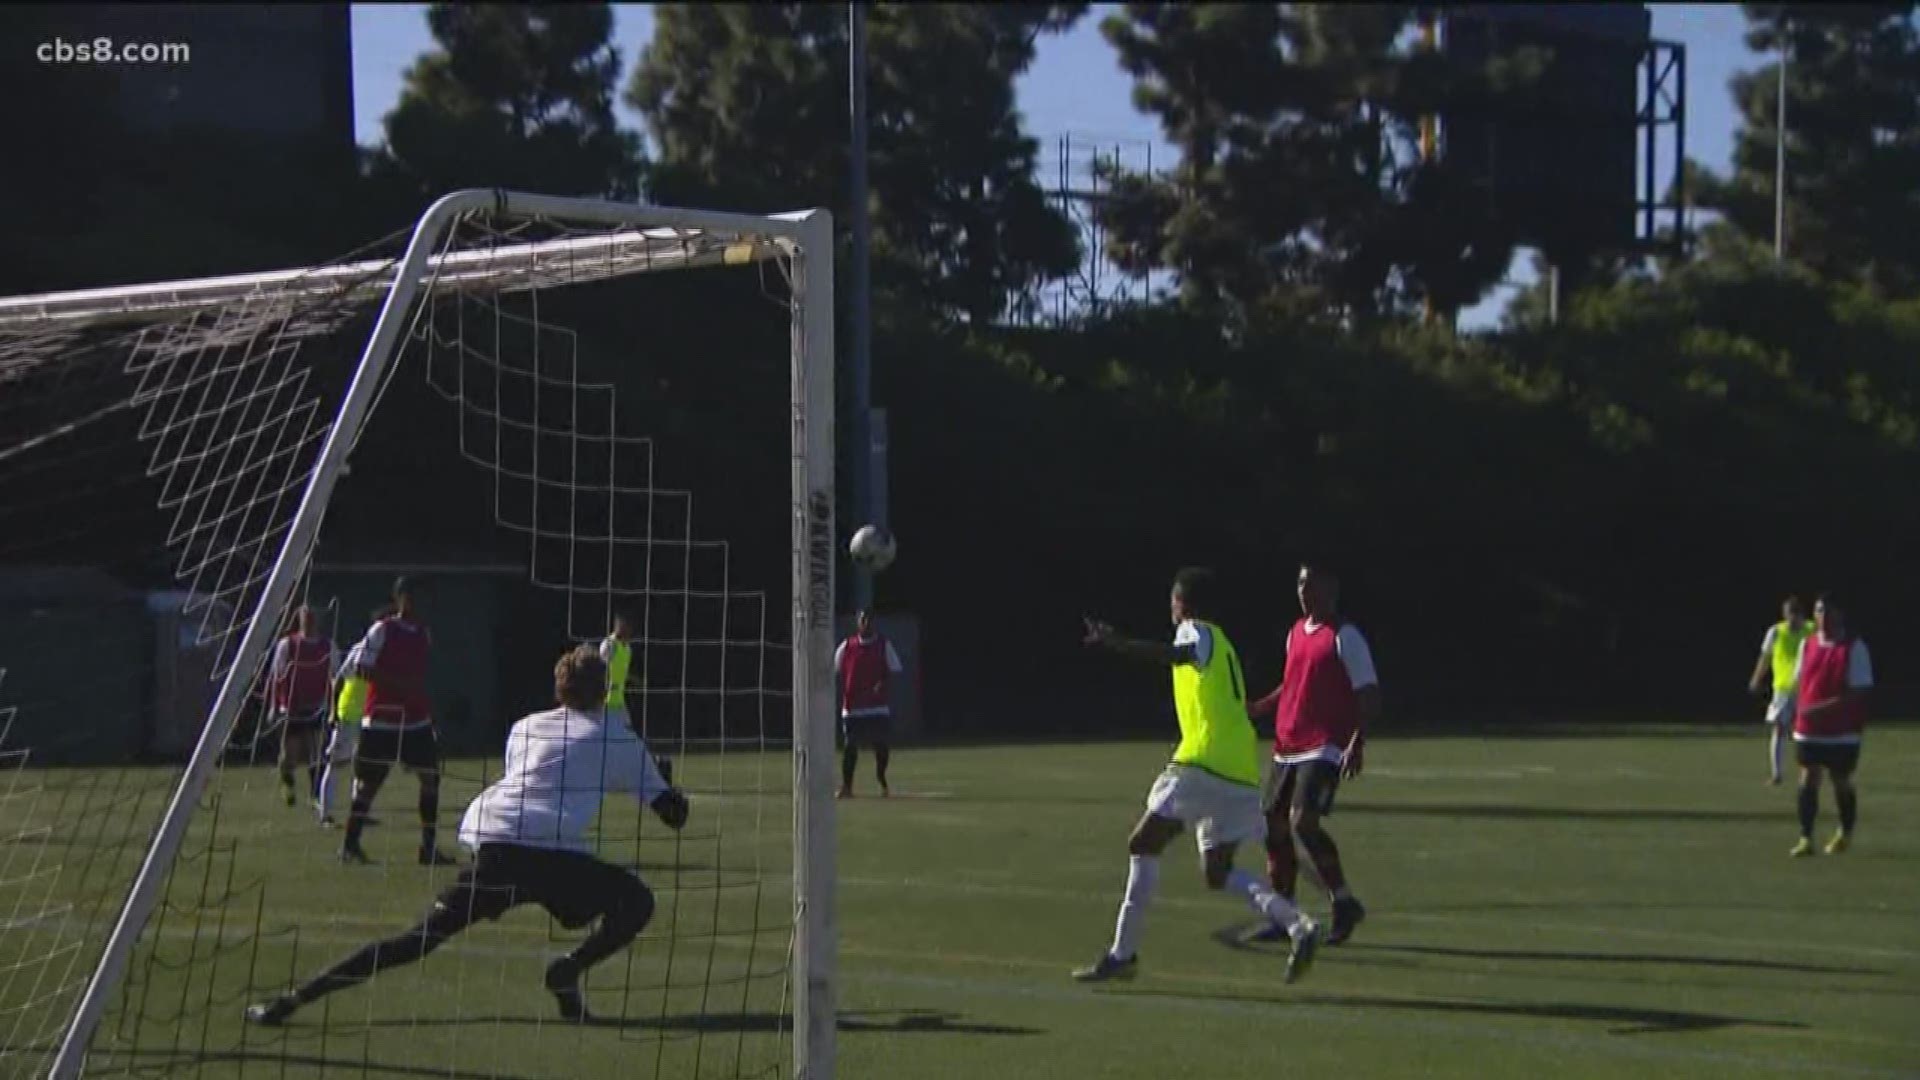 The San Diego Loyal soccer club’s head coach Landon Donovan is building the team from the ground up and held open tryouts at the University of San Diego.